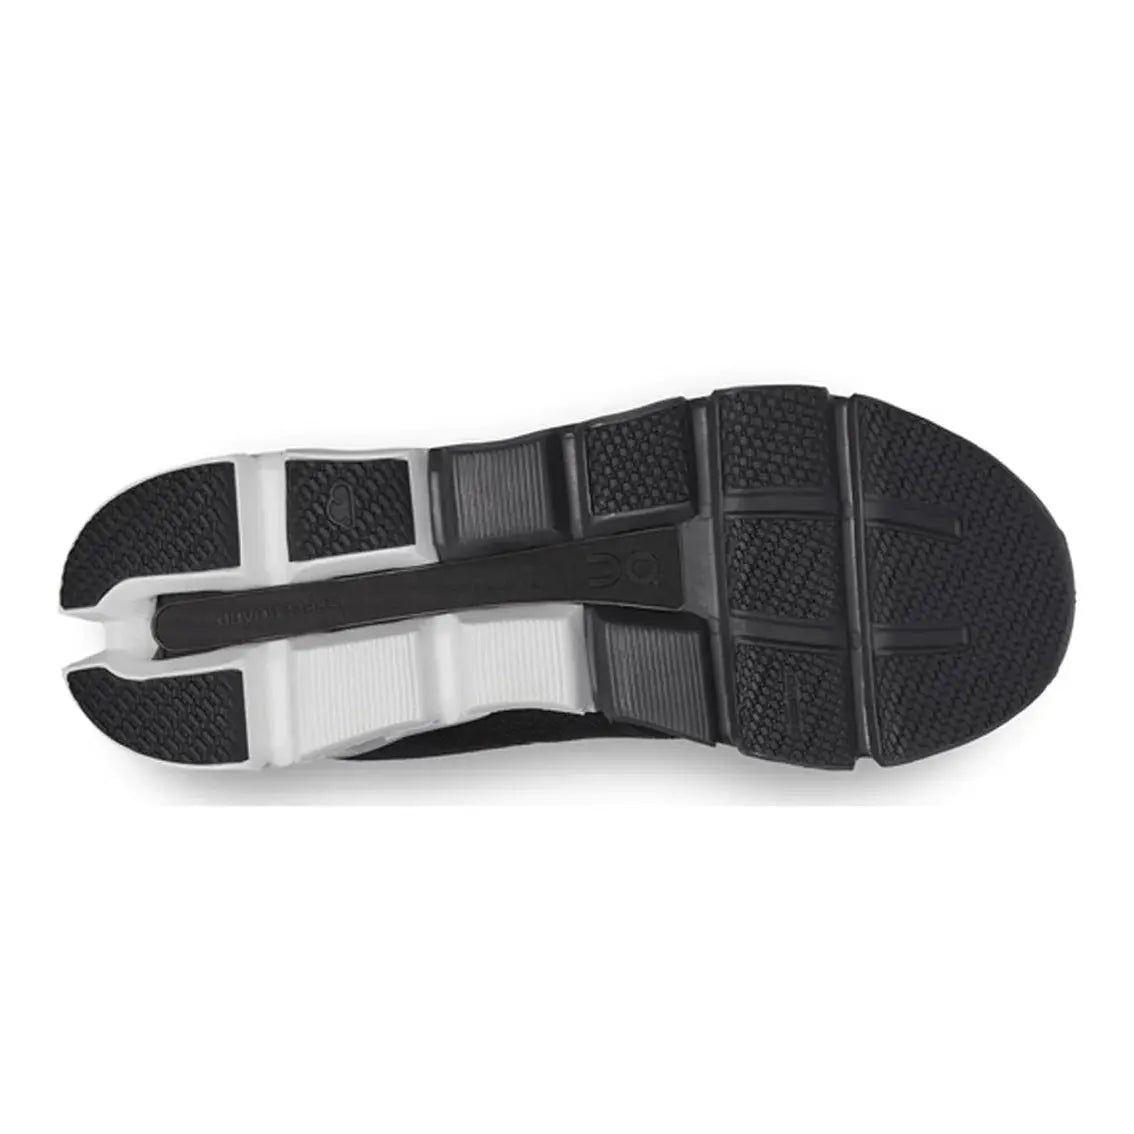 Womens On Running Cloudflyer 4 (Wide) - Black / White